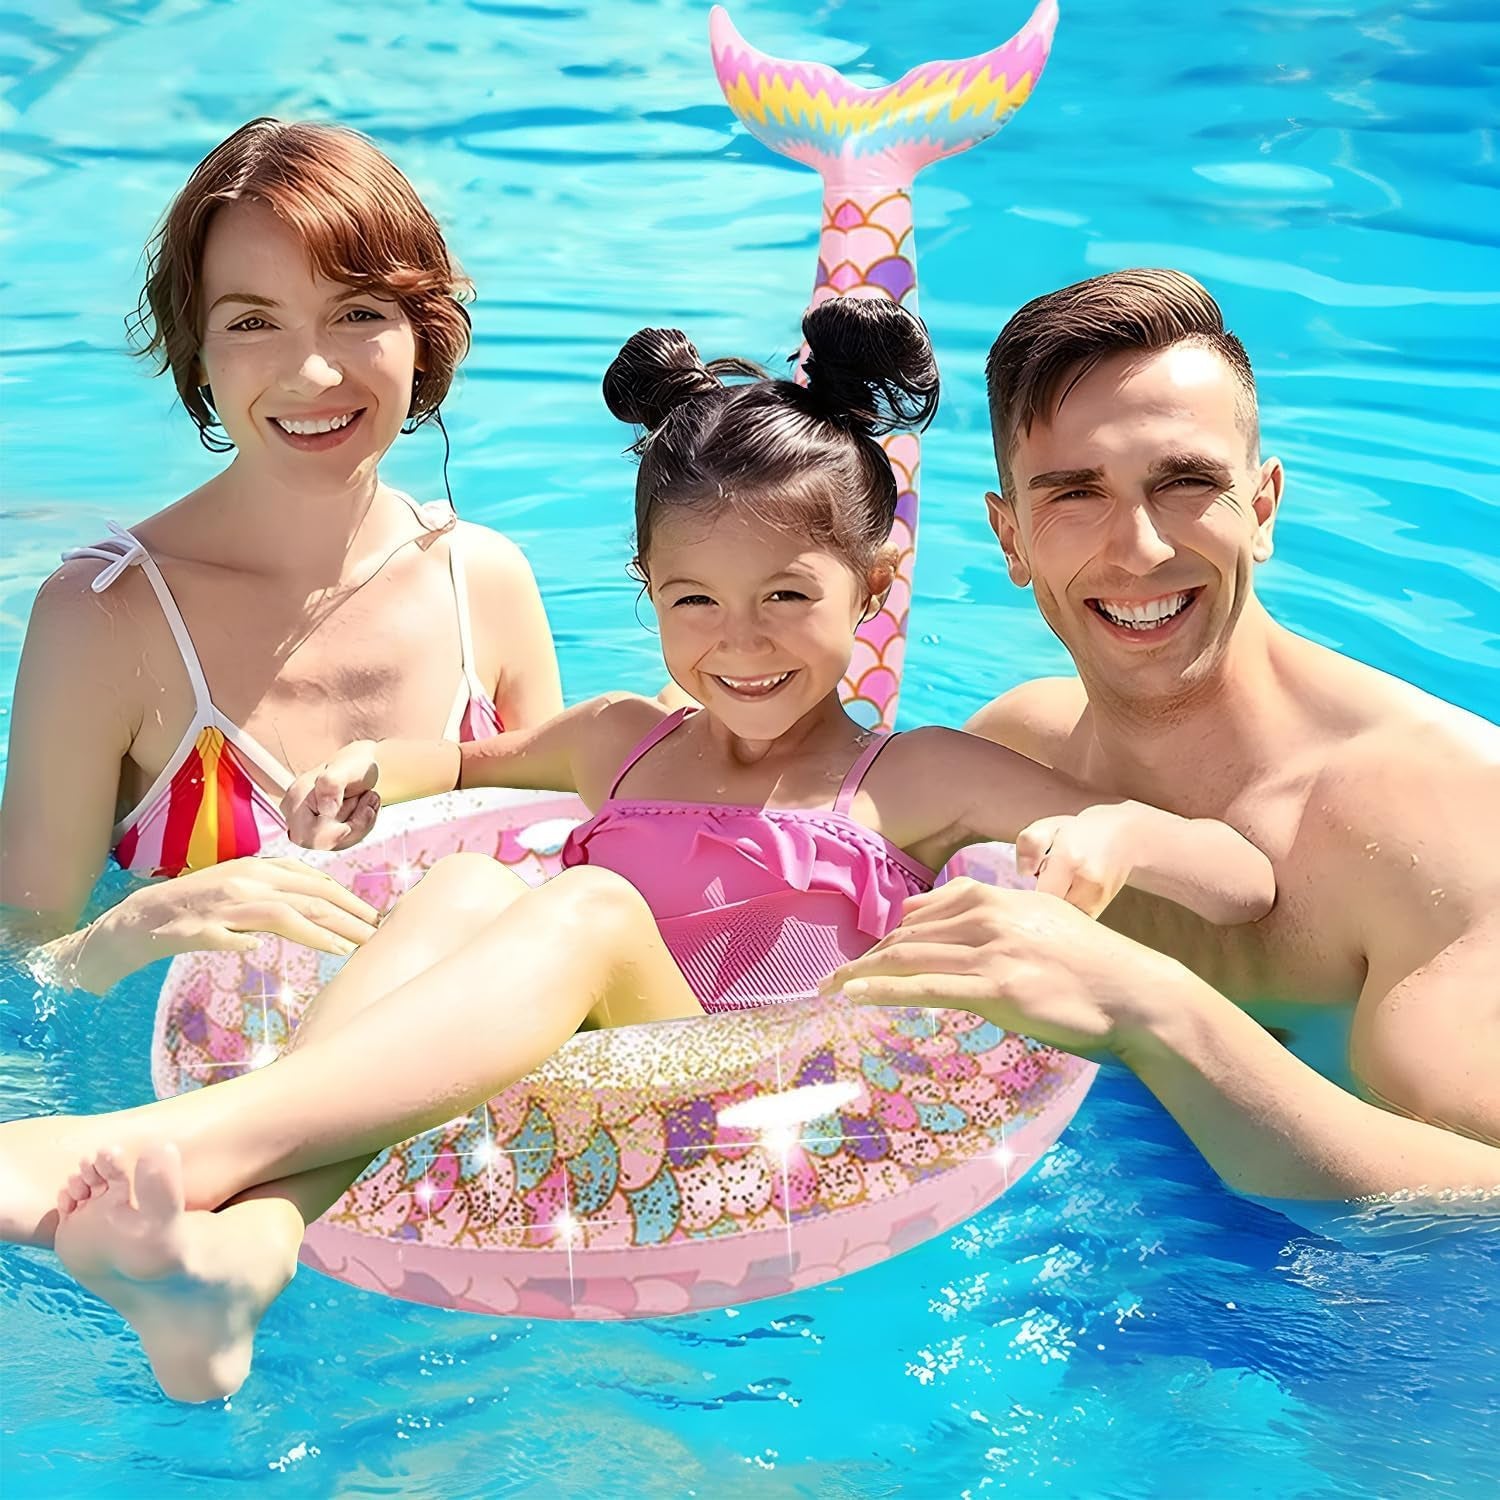 Pool Floats Inflatable Swimming Rings Mermaid Tail Tubes Glitters Water Party Summer Beach for Kids and Adults